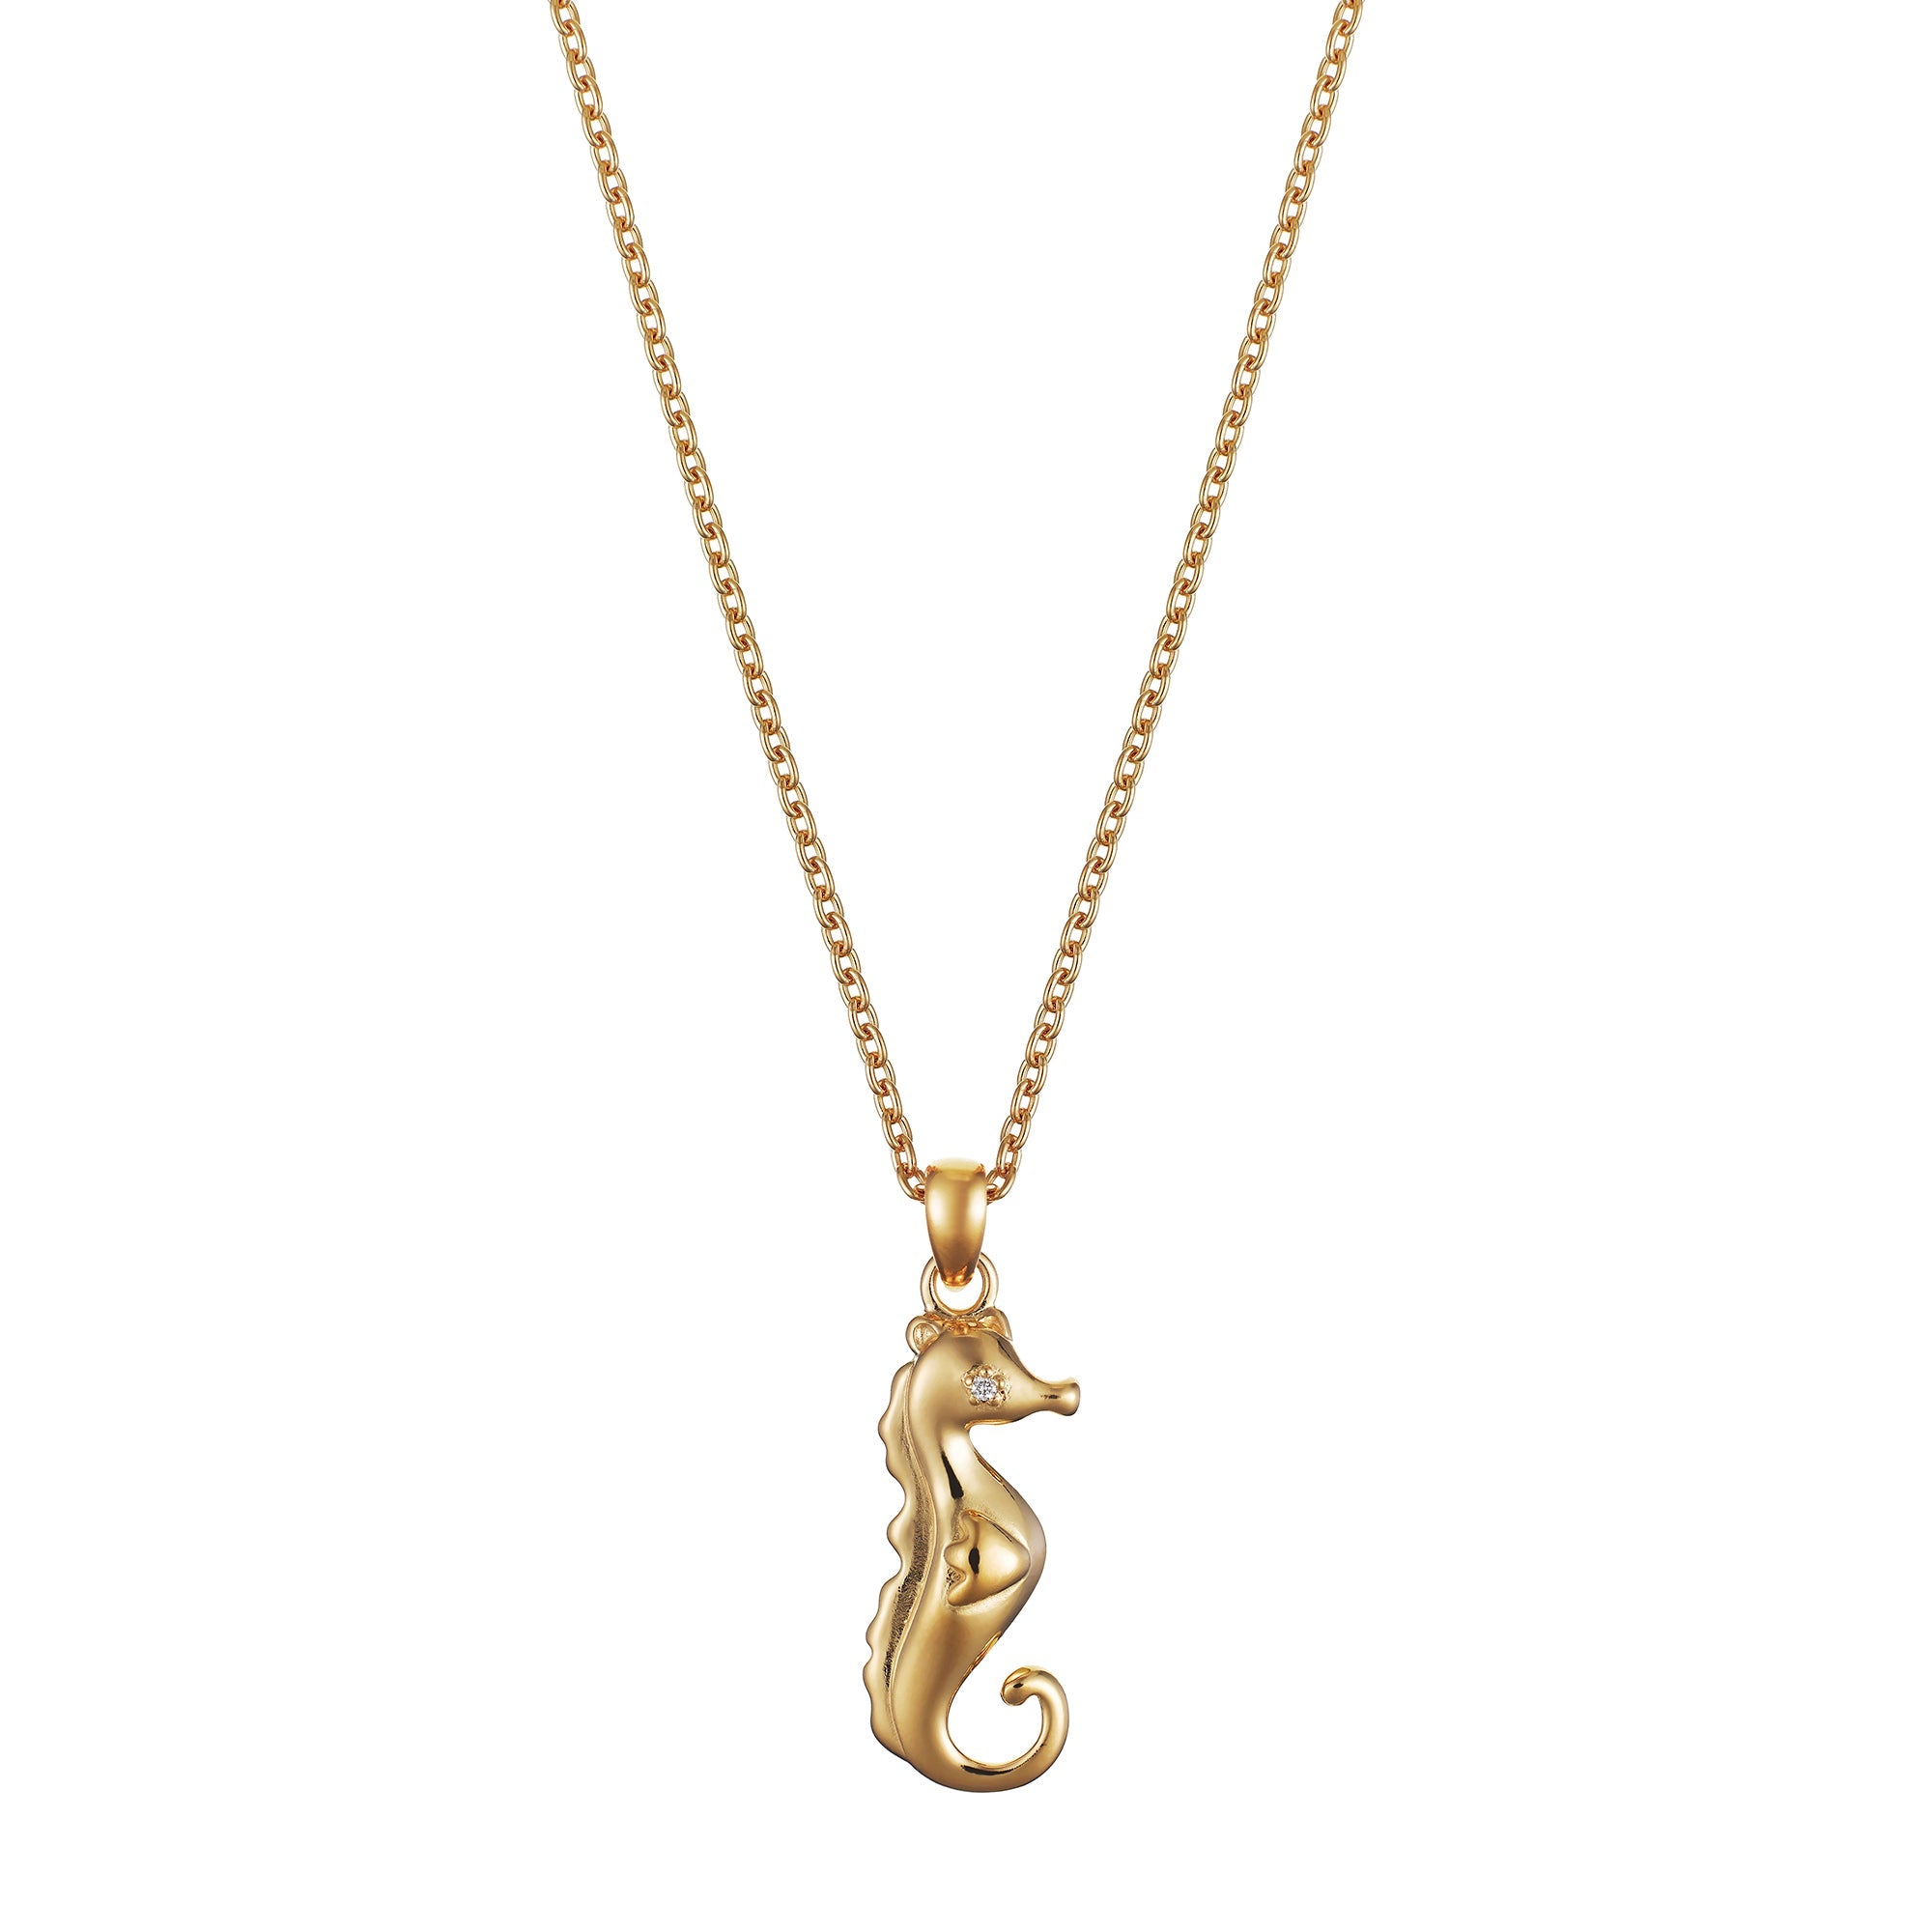 Browse Stylish Designs of 14k Seahorse Pendant - J.H. Breakell and Co.